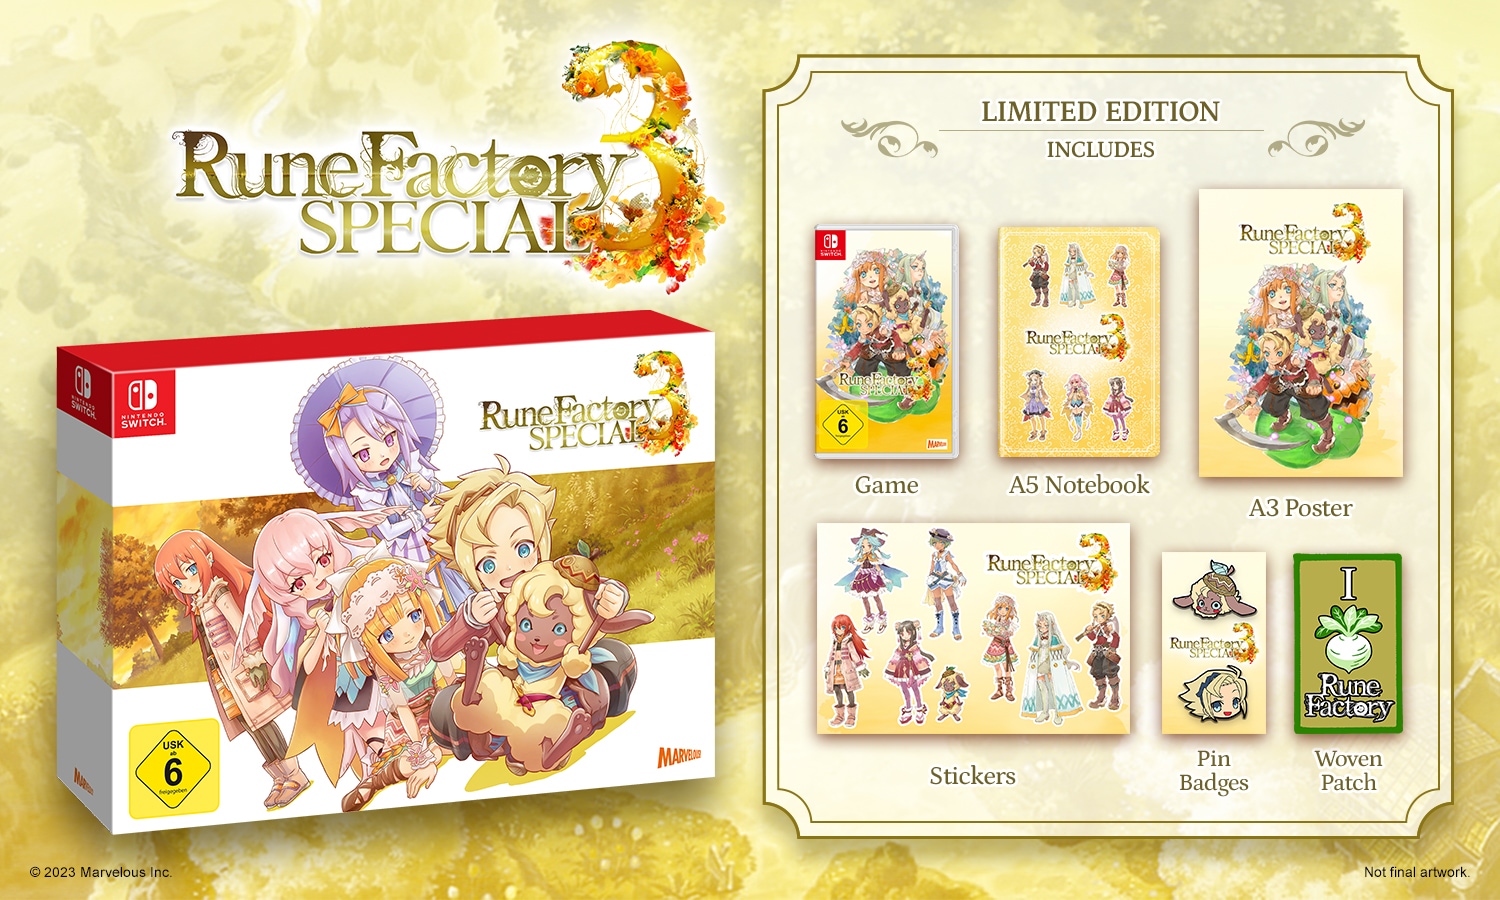 Spielesoftware »Rune Factory 3 Special Limited Edition«, Nintendo Switch